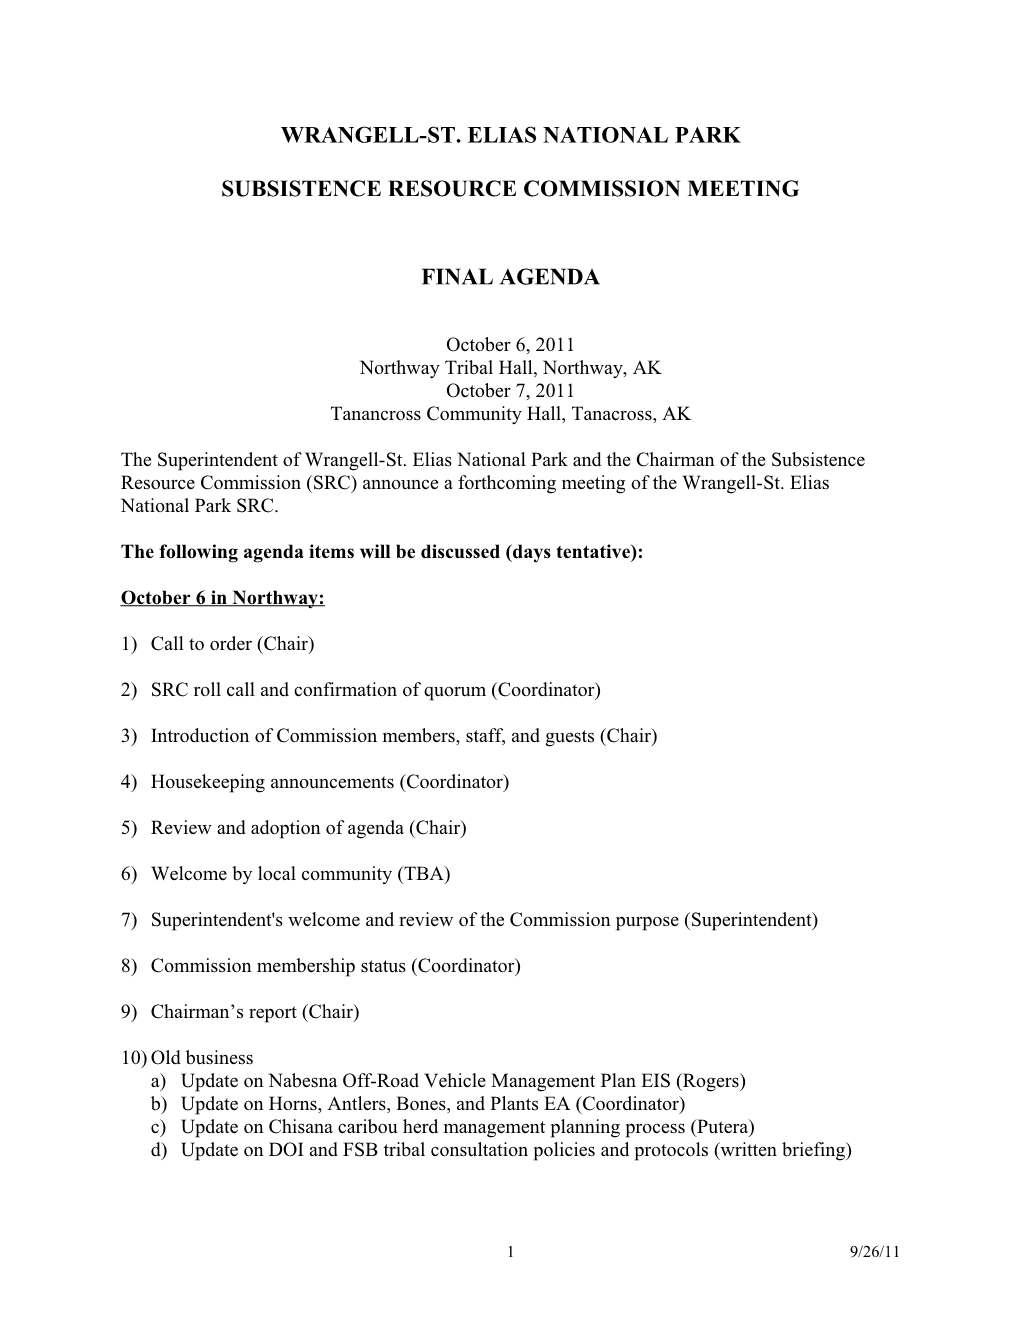 Subsistence Resource Commission Meeting